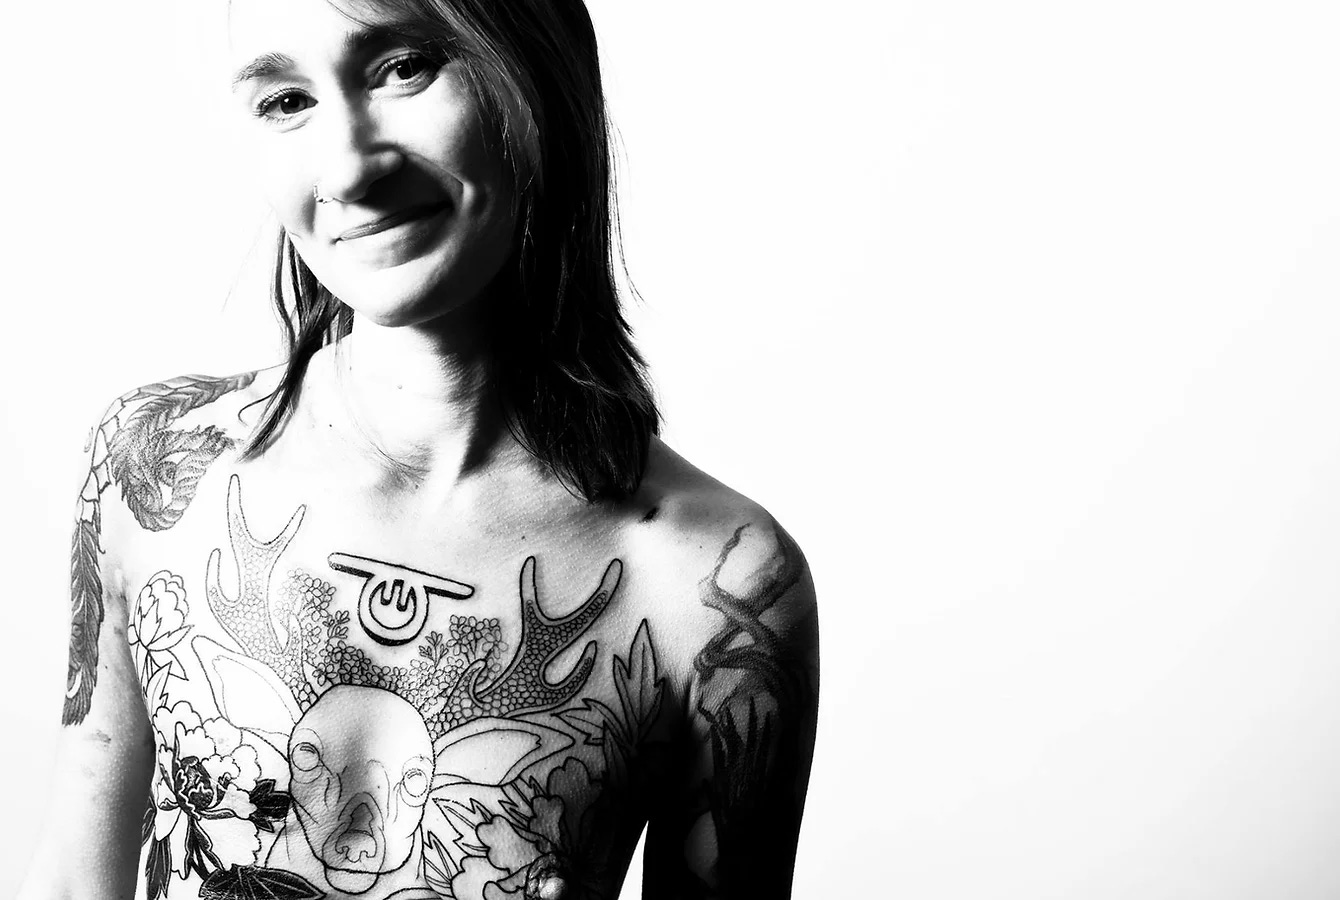 A mastectomy tattoo can be liberating—here's everything you need